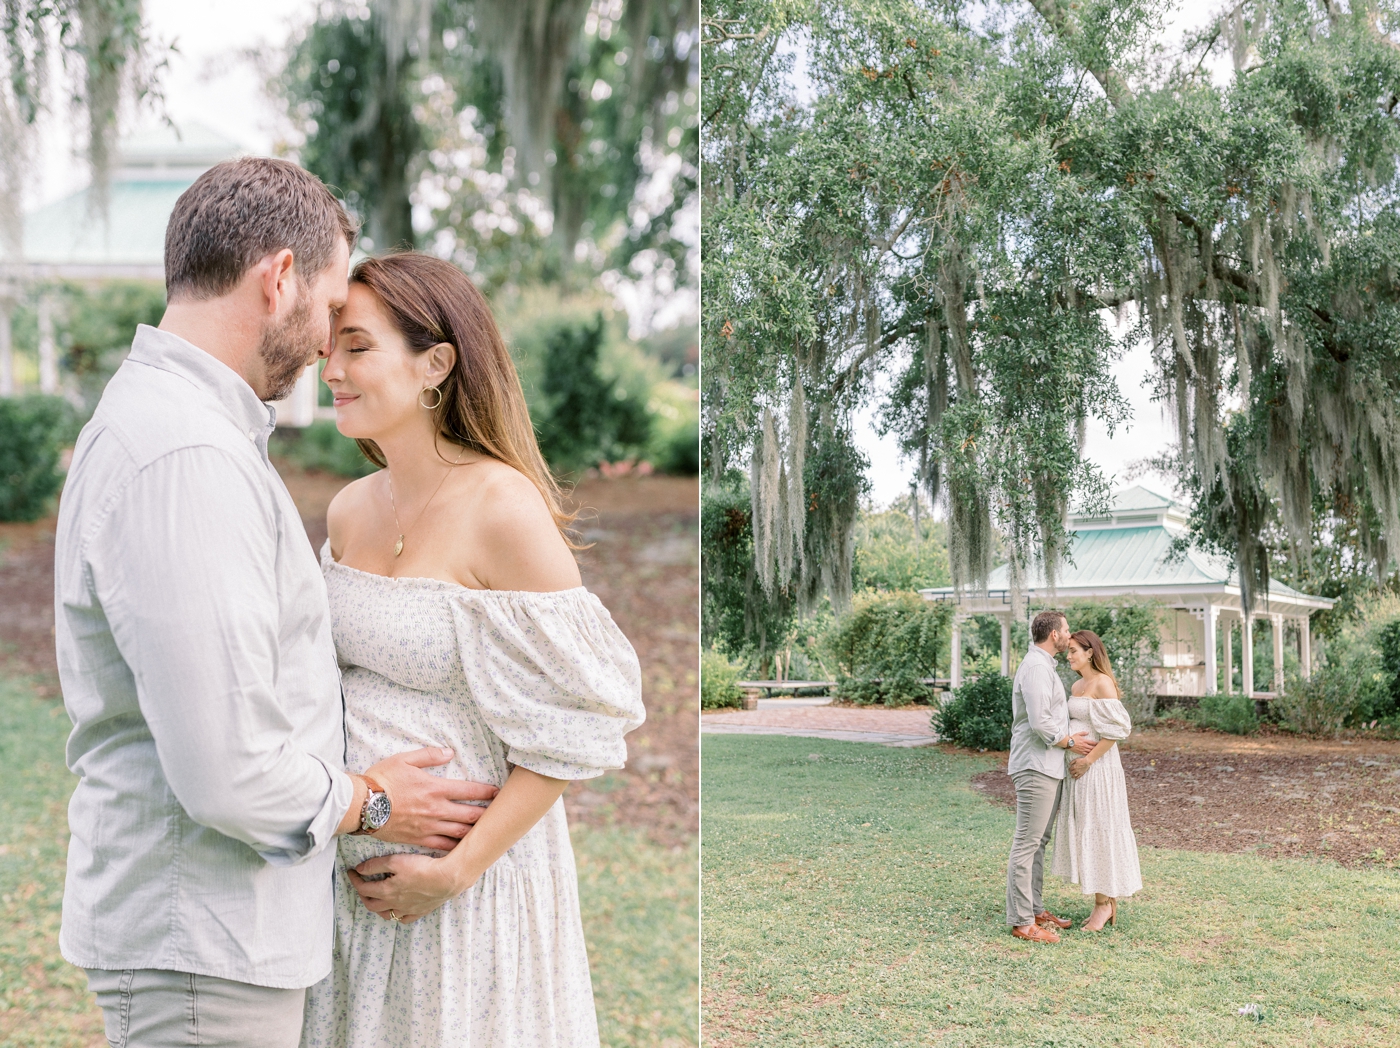 Mom and dad to be walking through Hampton Park | Photo by Caitlyn Motycka Photography.